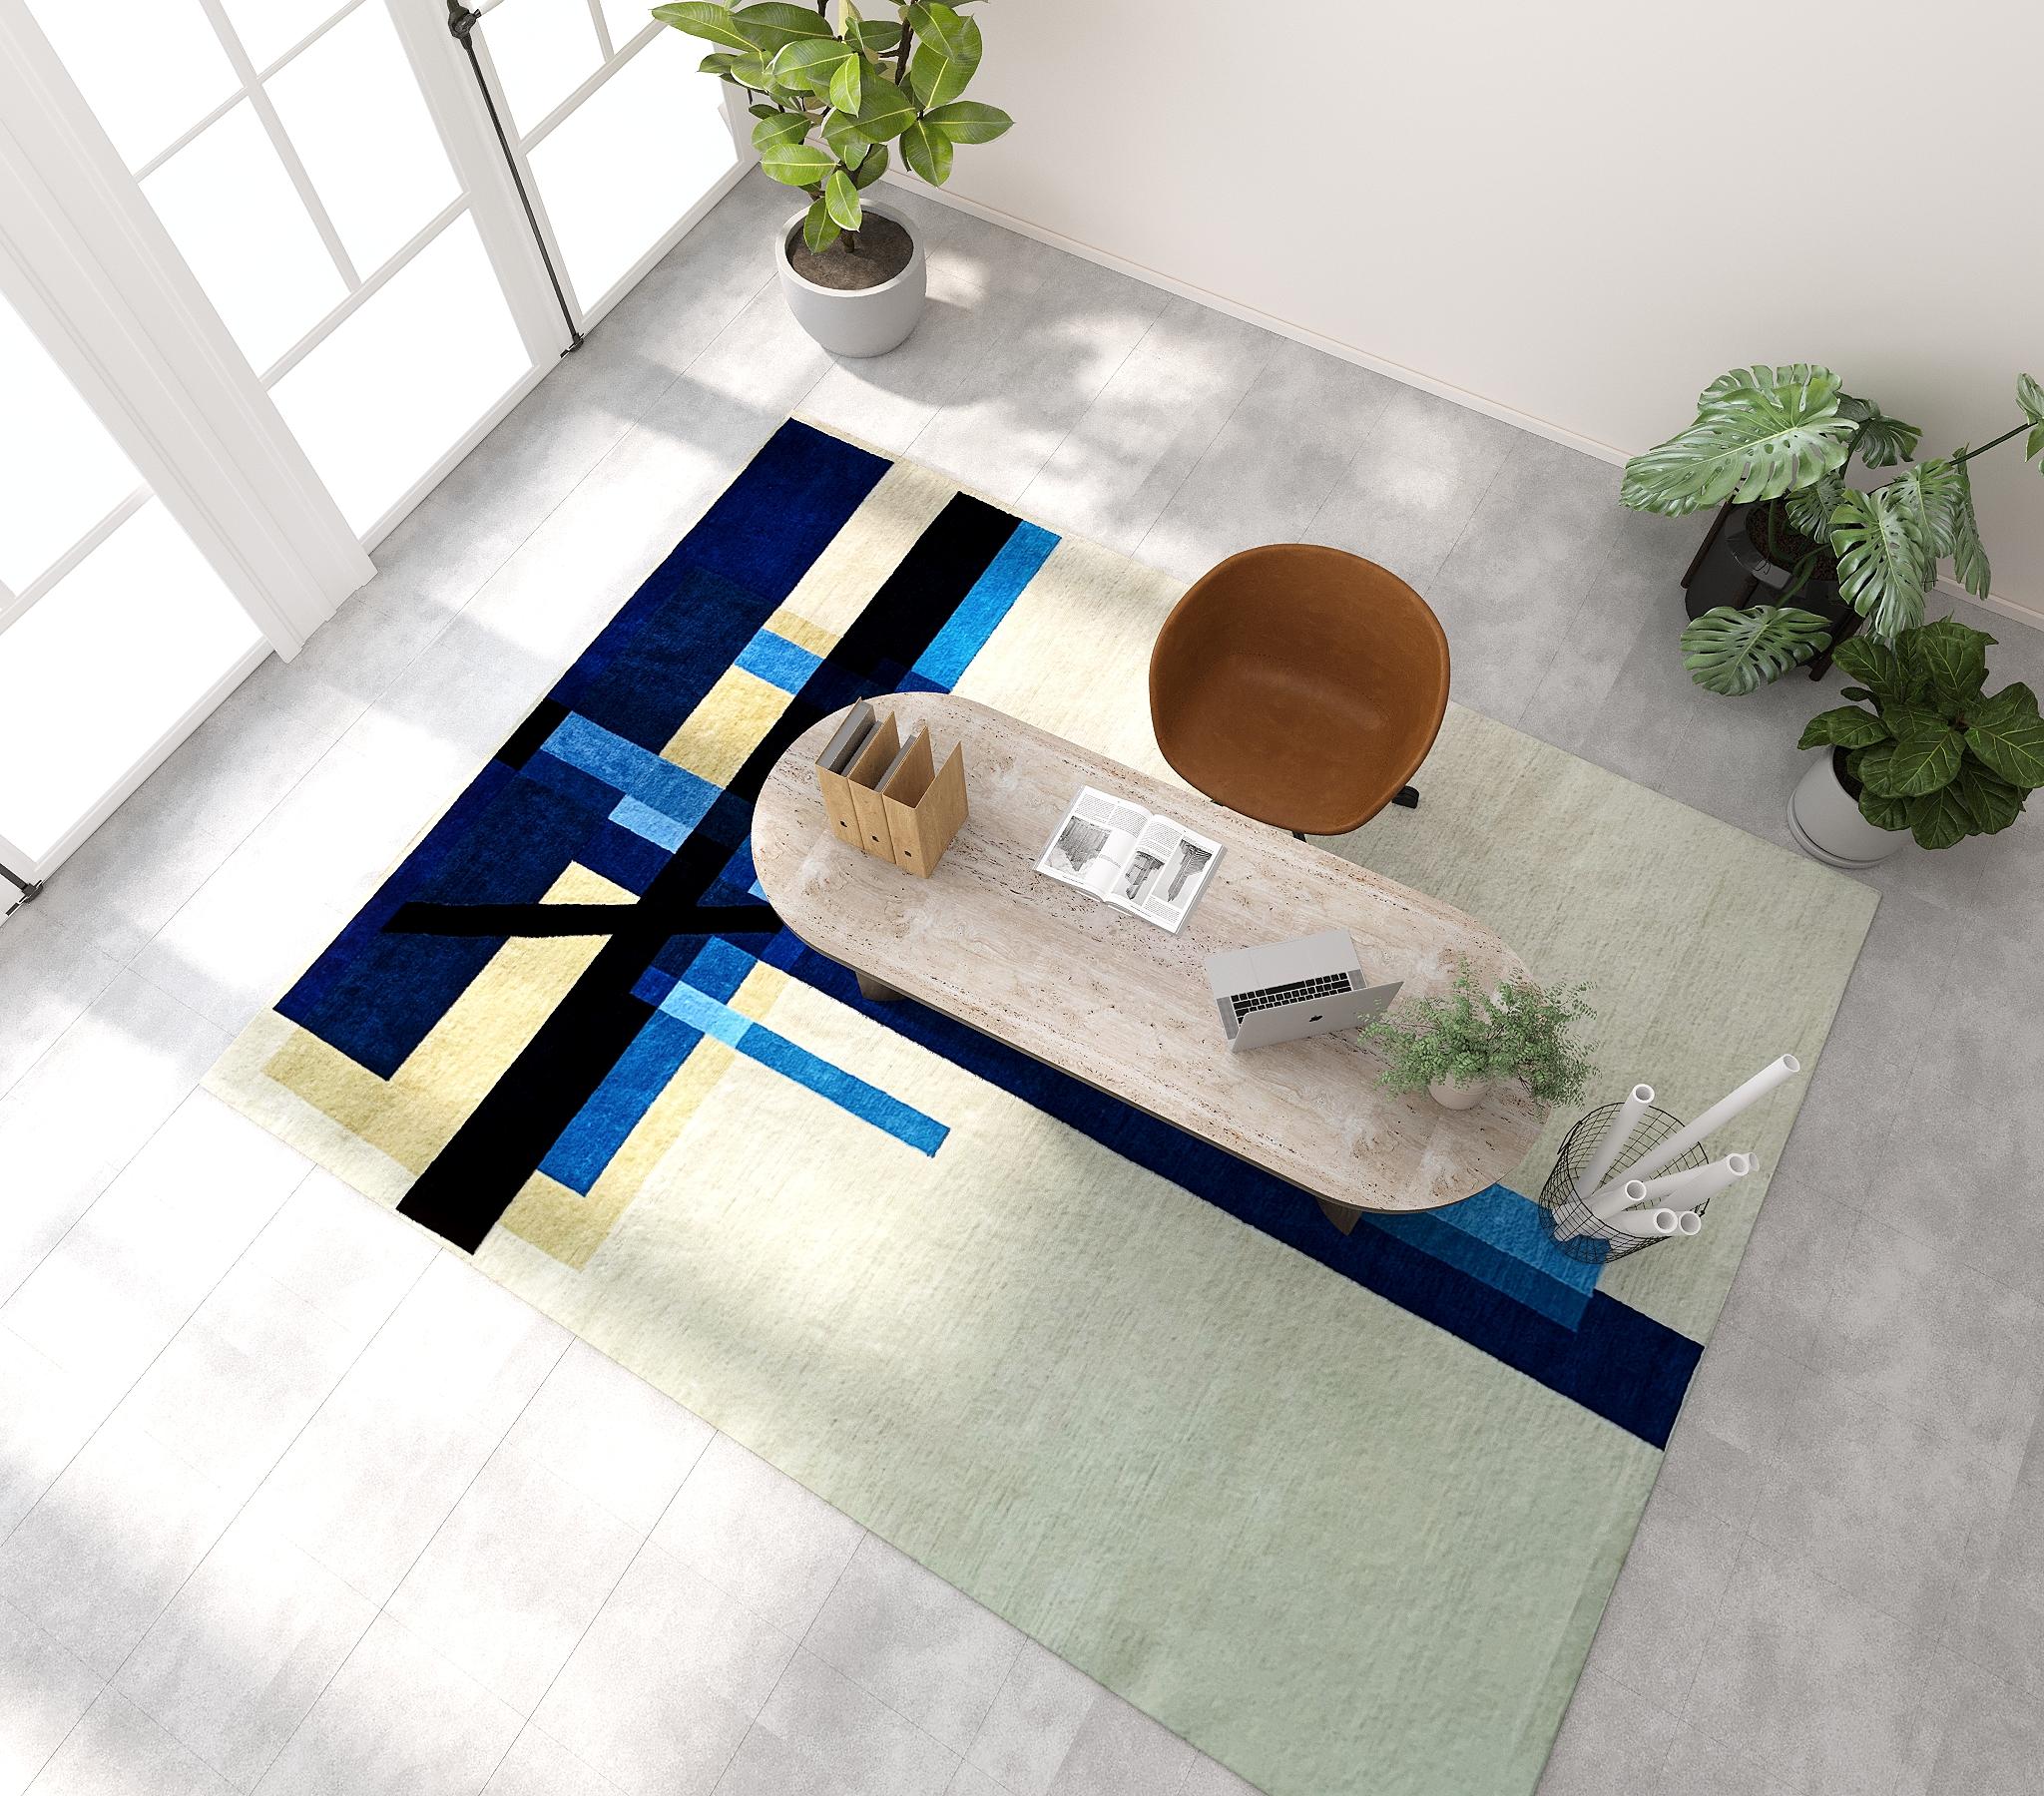 Custom hand knotted rug based on the painting “Composition C XII” by László Moholy-Nagy.

Colors: 25 custom-dyed colors. Main colors in the rug: 23 different blue shades, from midnight blue to royal blue and cornflower blue to navy. Background in